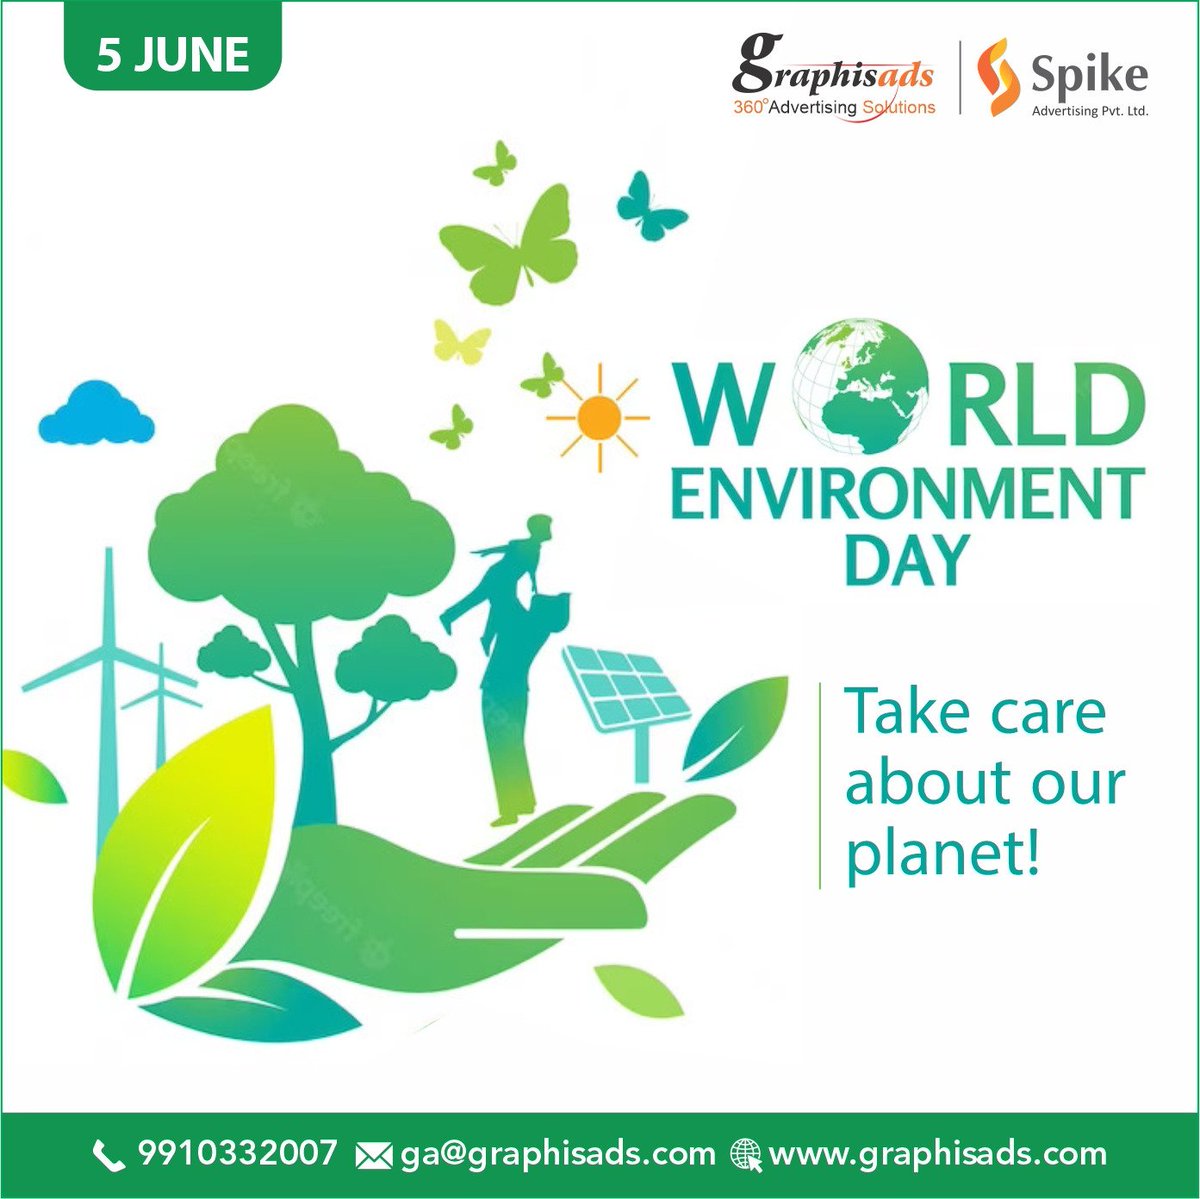 Today and every day, let's be the change for a greener future! Happy World Environment Day! 🌿💙

#BeTheChange #GreenerFuture #WorldEnvironmentDay #SustainableLiving #ProtectOurPlanet #GreenRevolution #NatureFirst #EnvironmentalAction #TogetherForNature #GoGreen